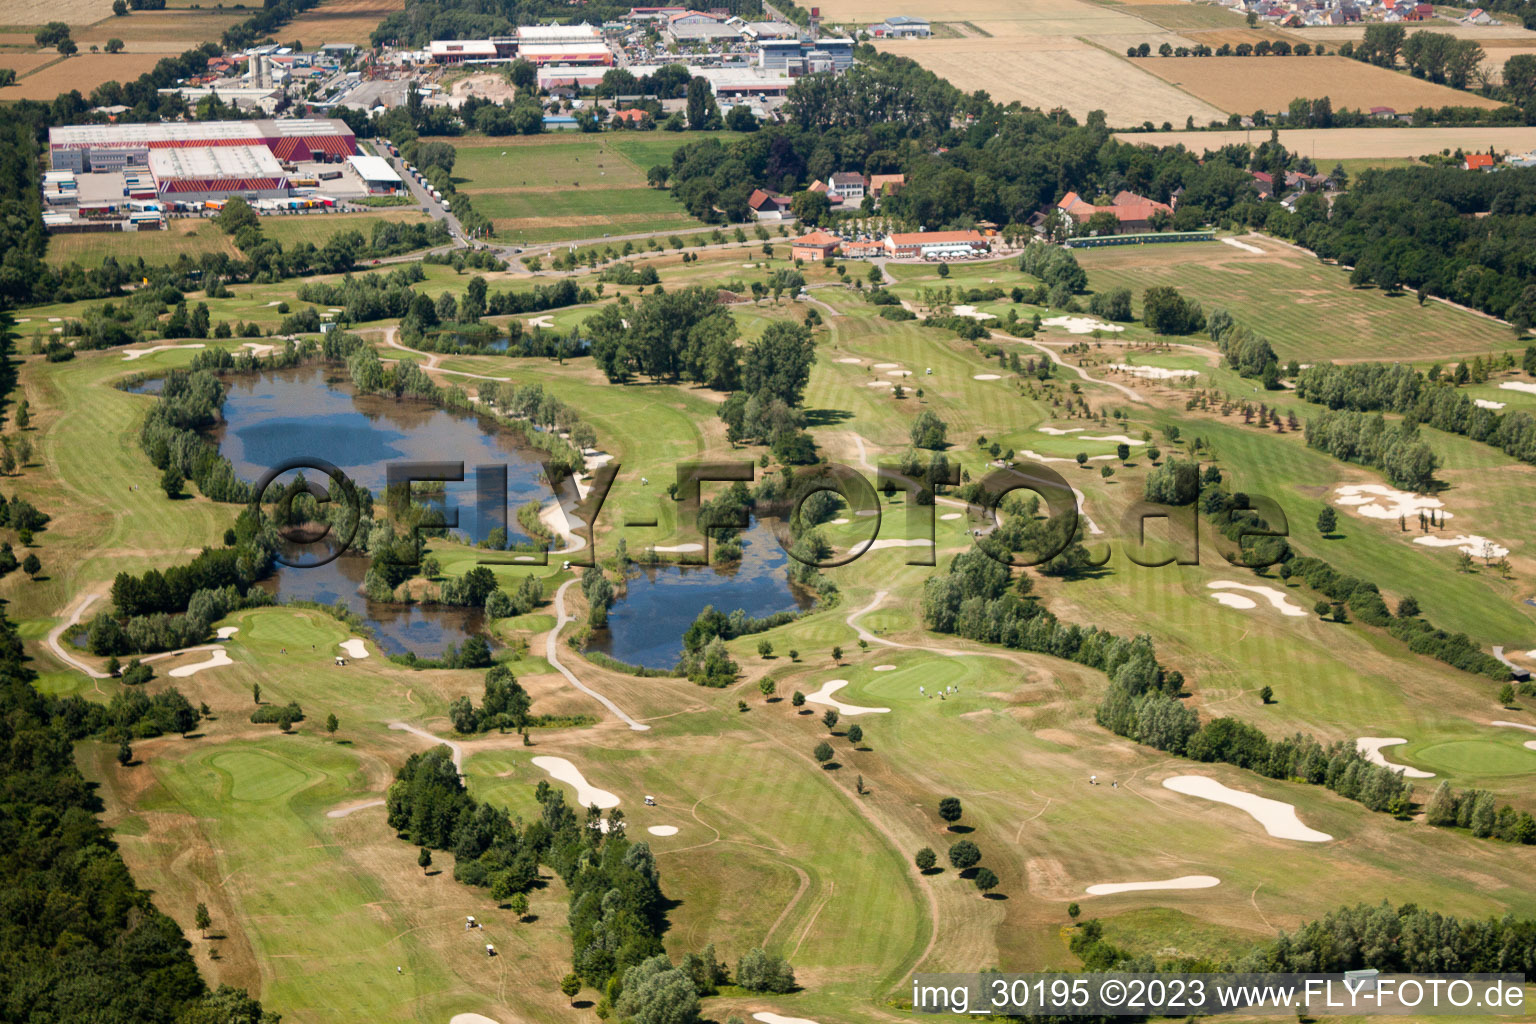 Dreihof Golf Club in Essingen in the state Rhineland-Palatinate, Germany seen from a drone